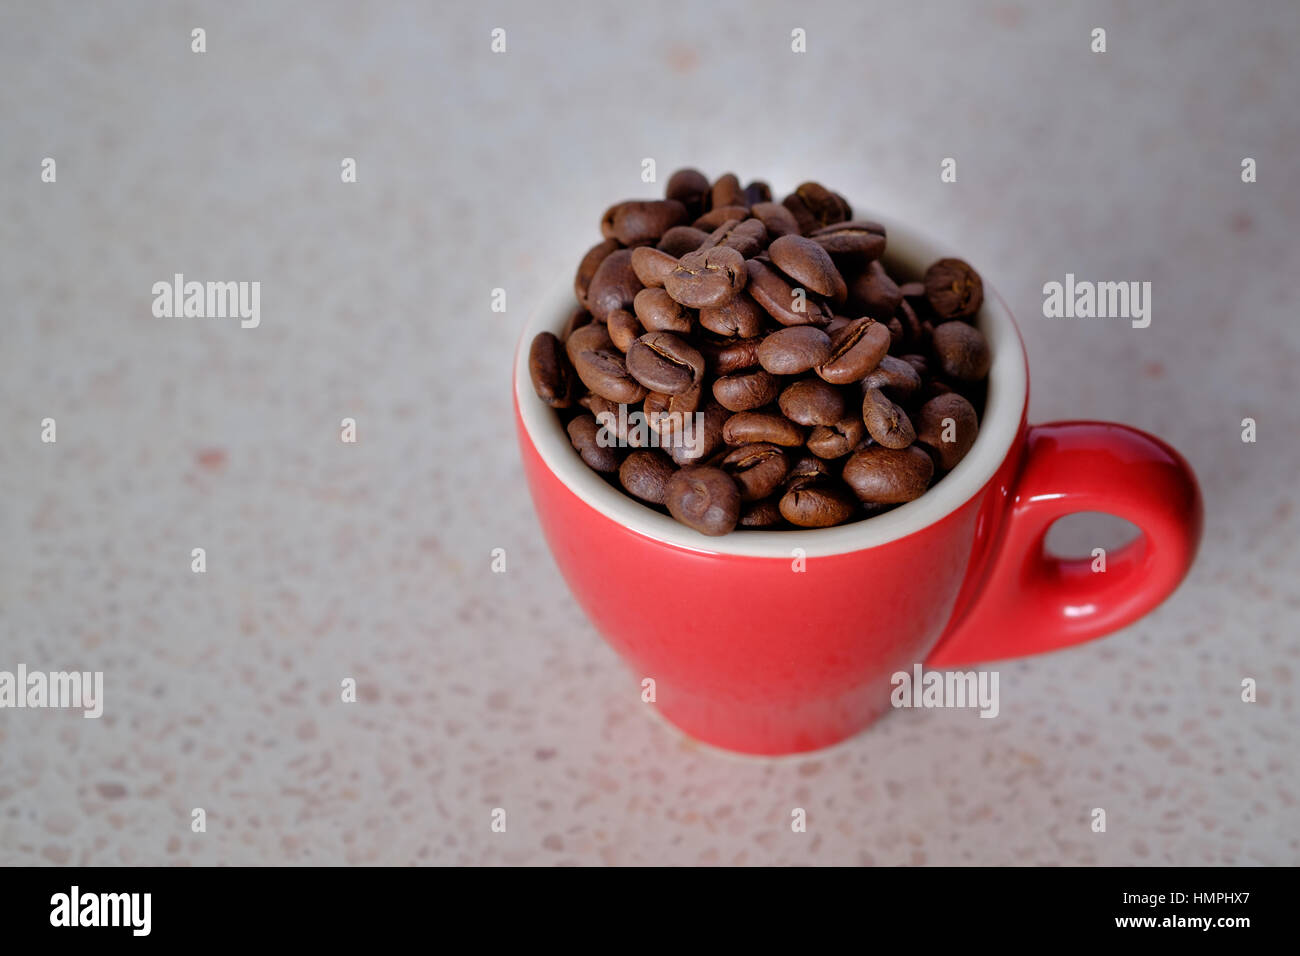 Coffee beans in a red espresso cup on a flecked bench top Stock Photo